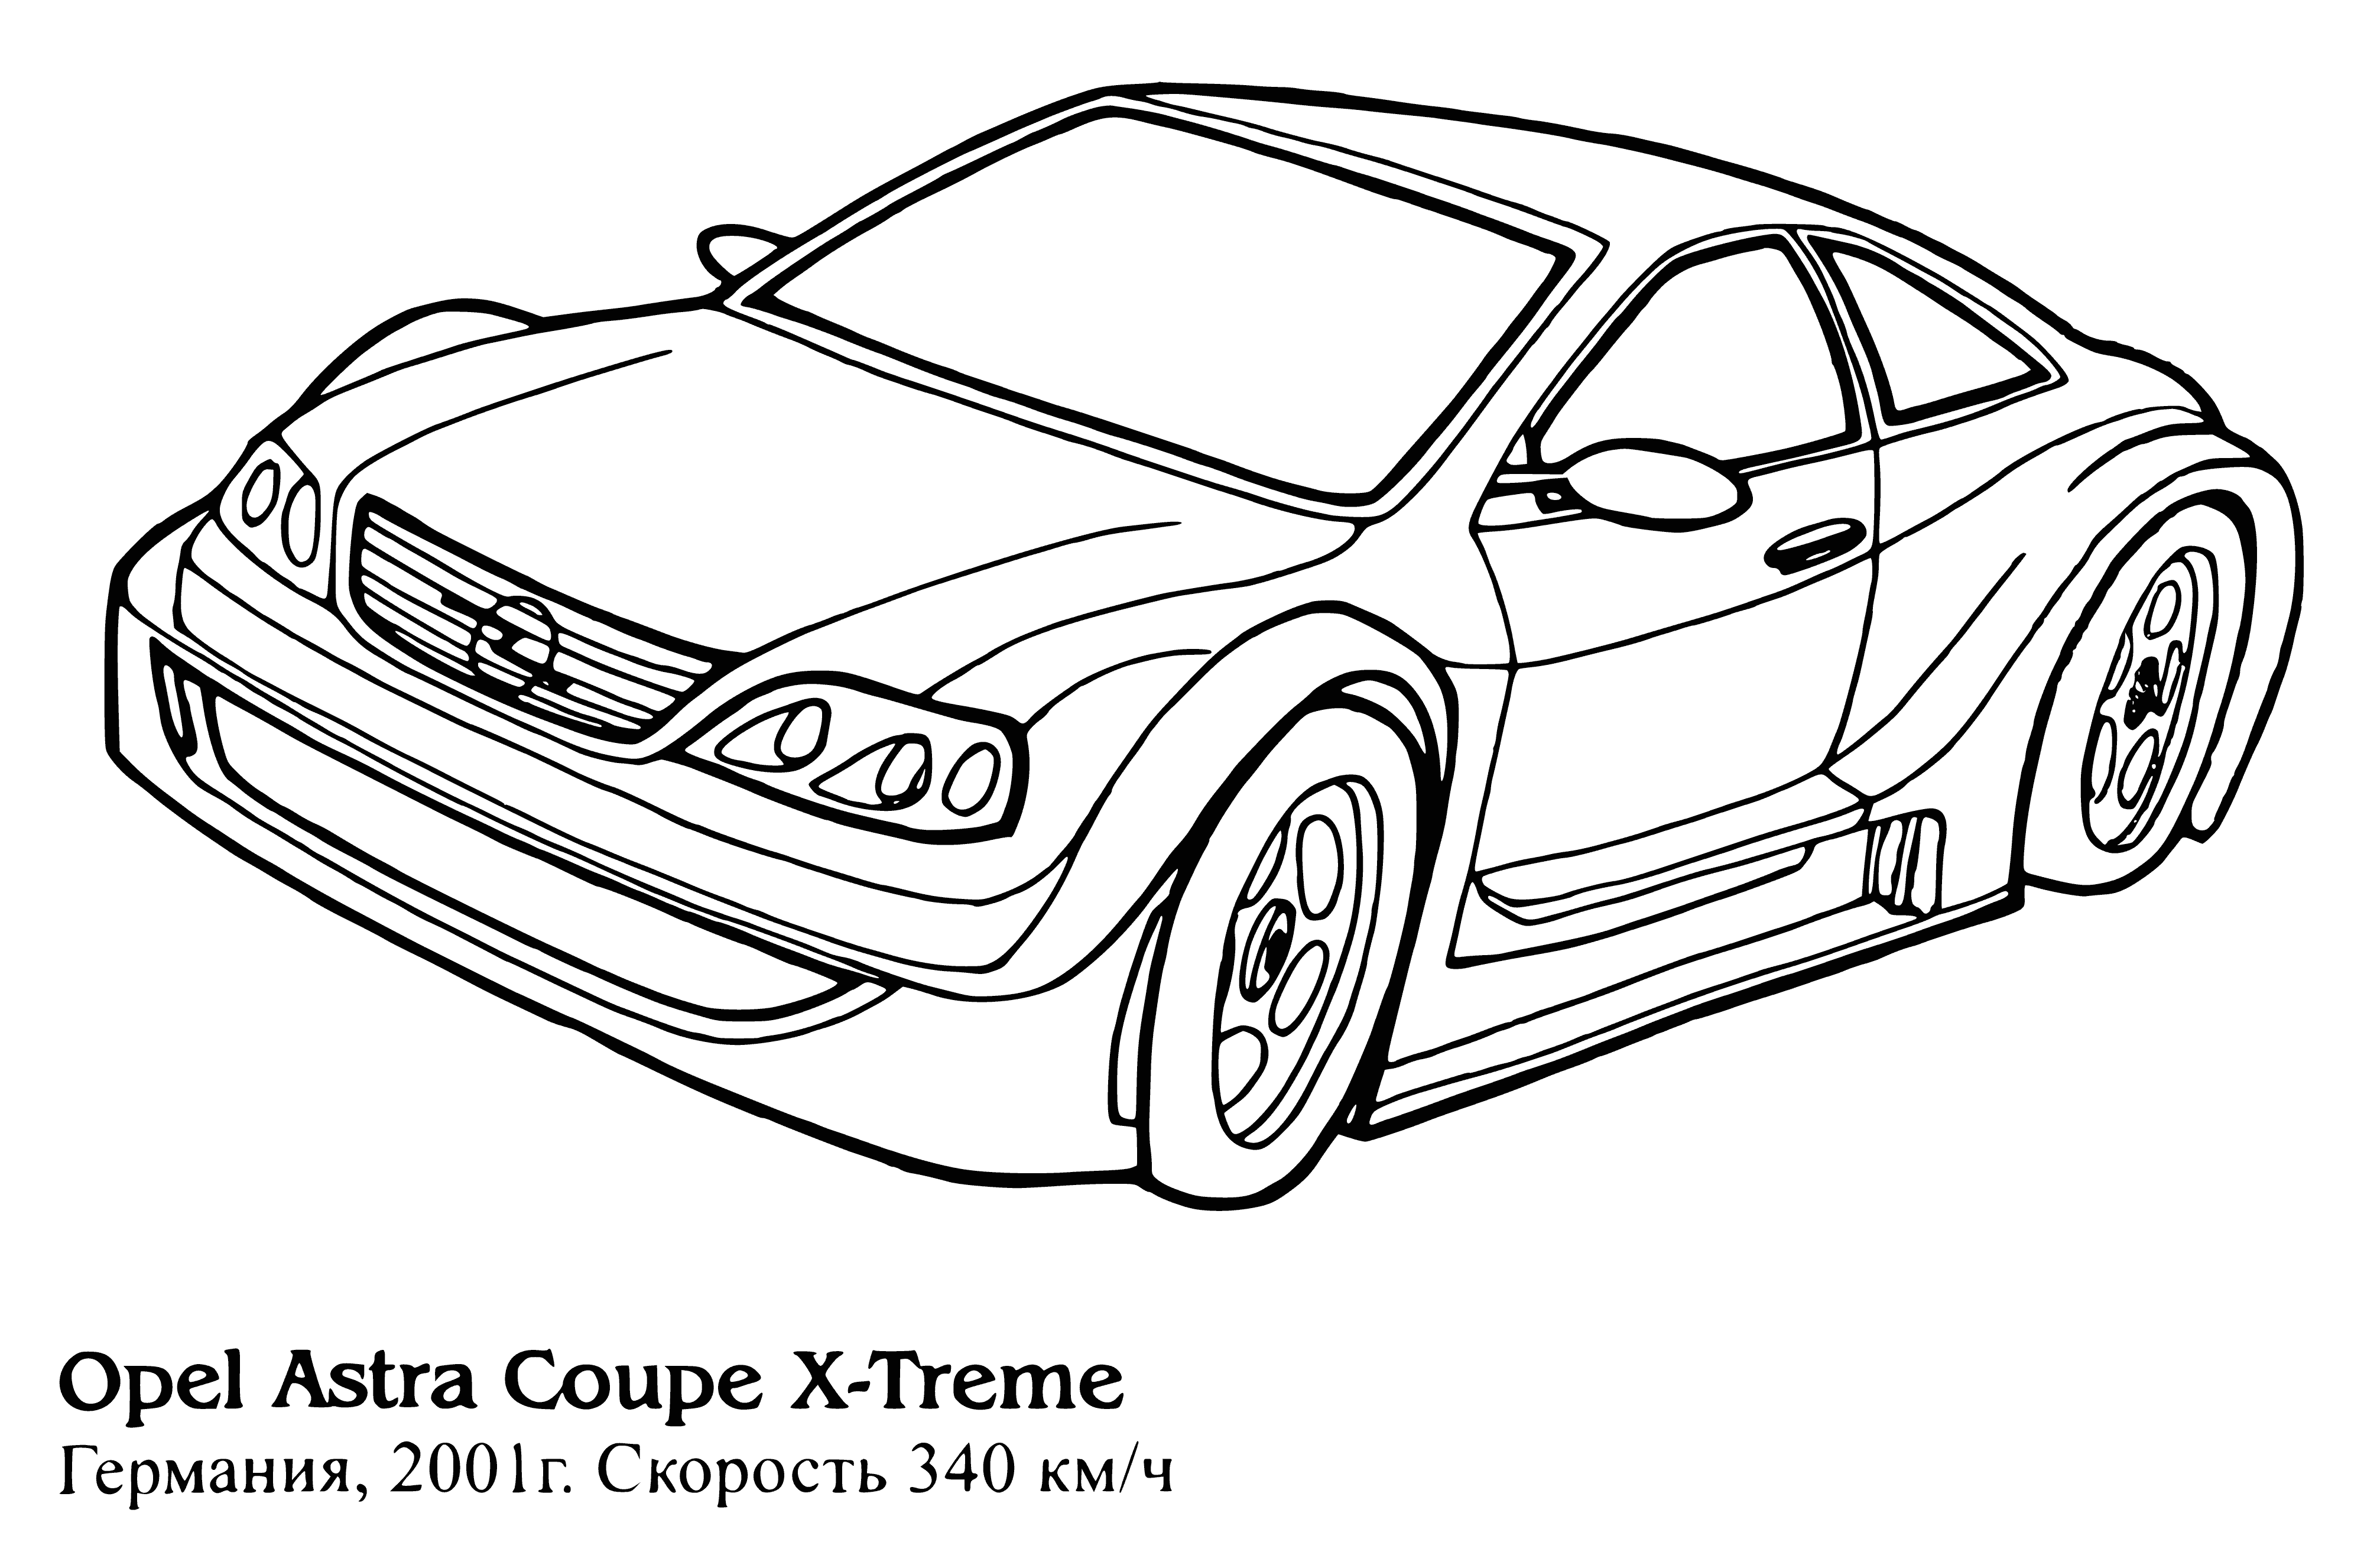 coloring page: Sleek blue Opel Astra Coupe X-Treme with two doors & spoiler, driving down a road. In great condition & looks brand new.